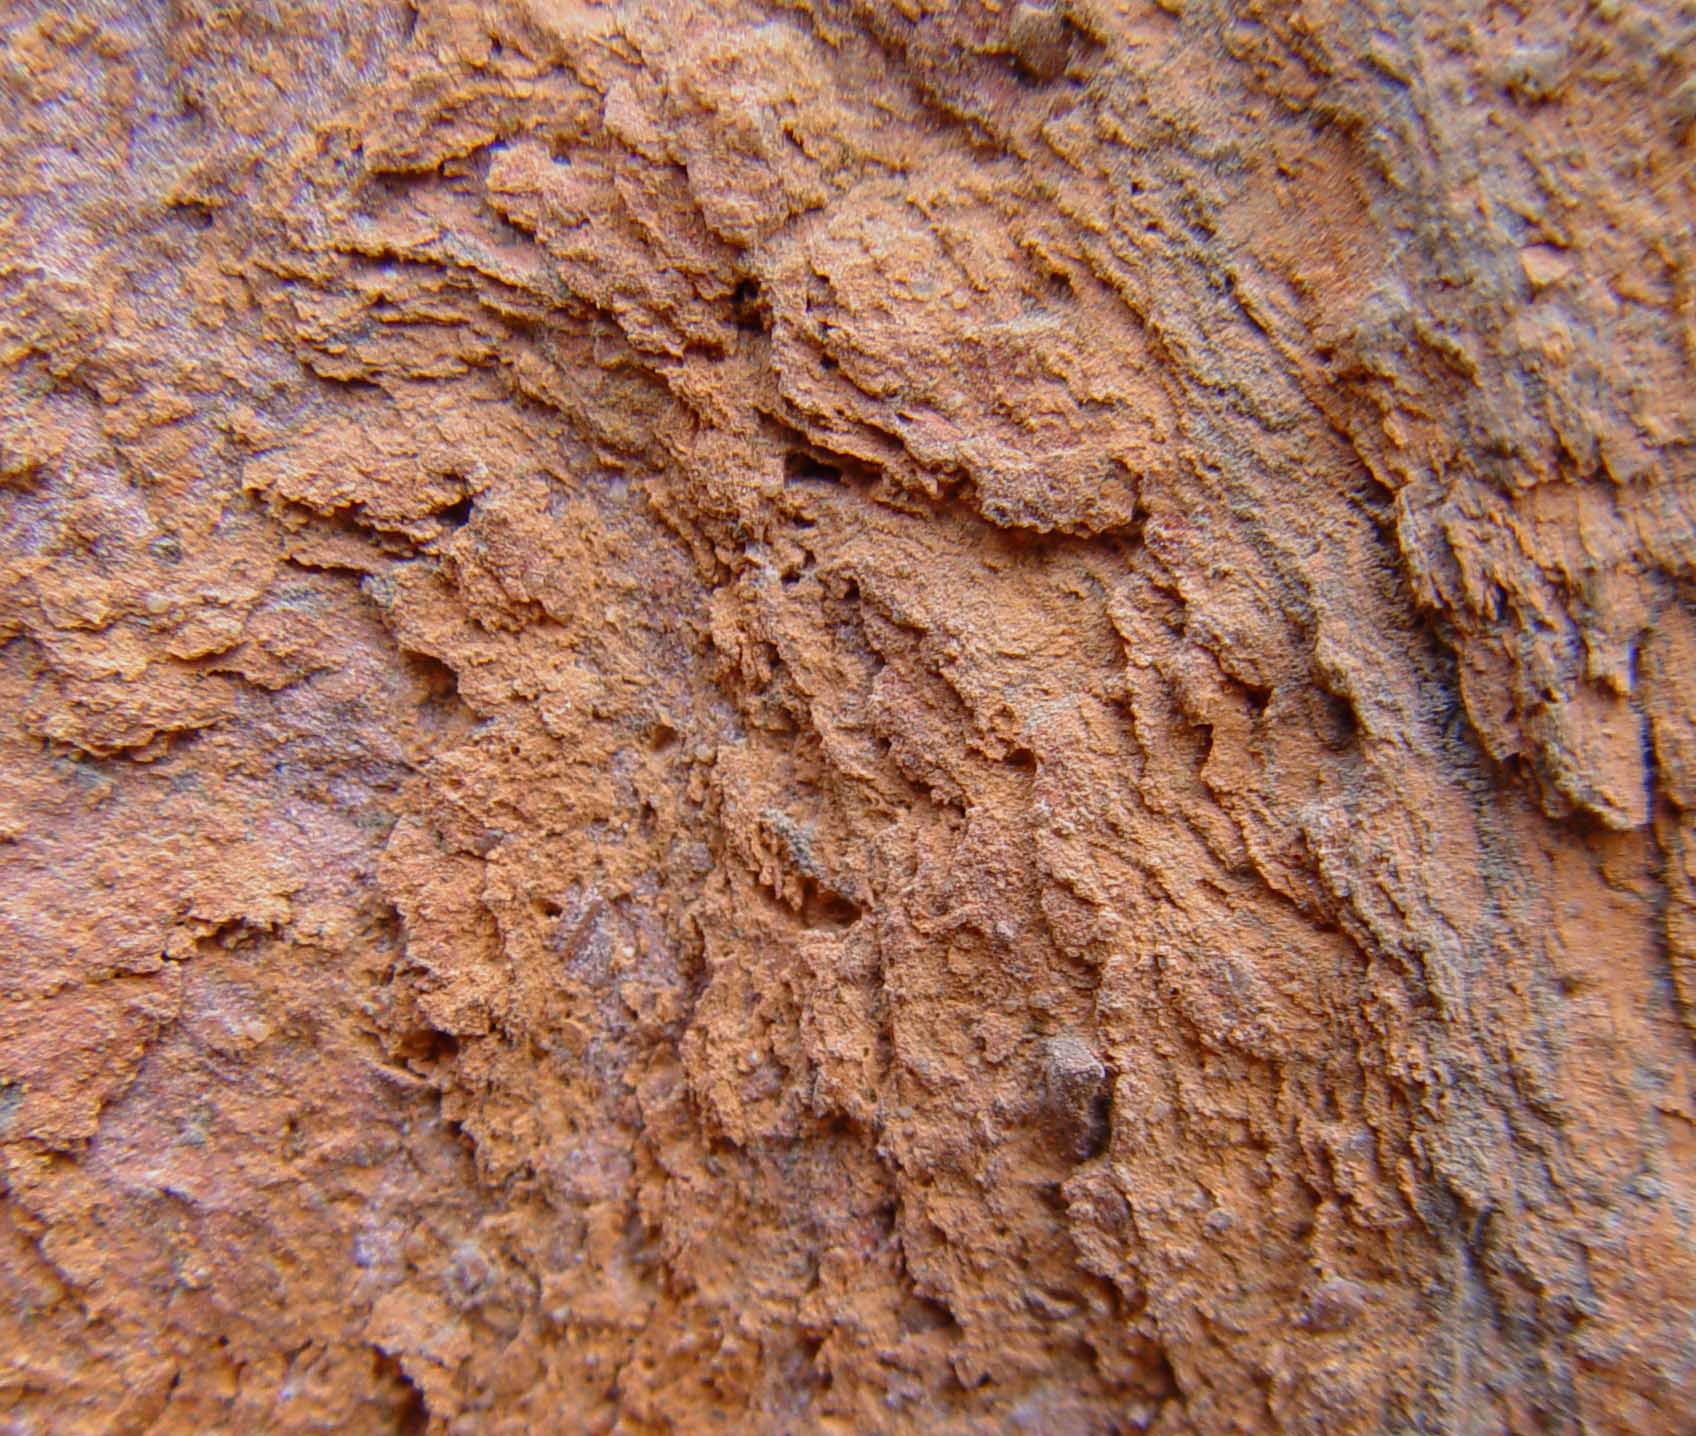 Figure 1: The scaling surface of a damaged brick, caused by crystallizing salts.